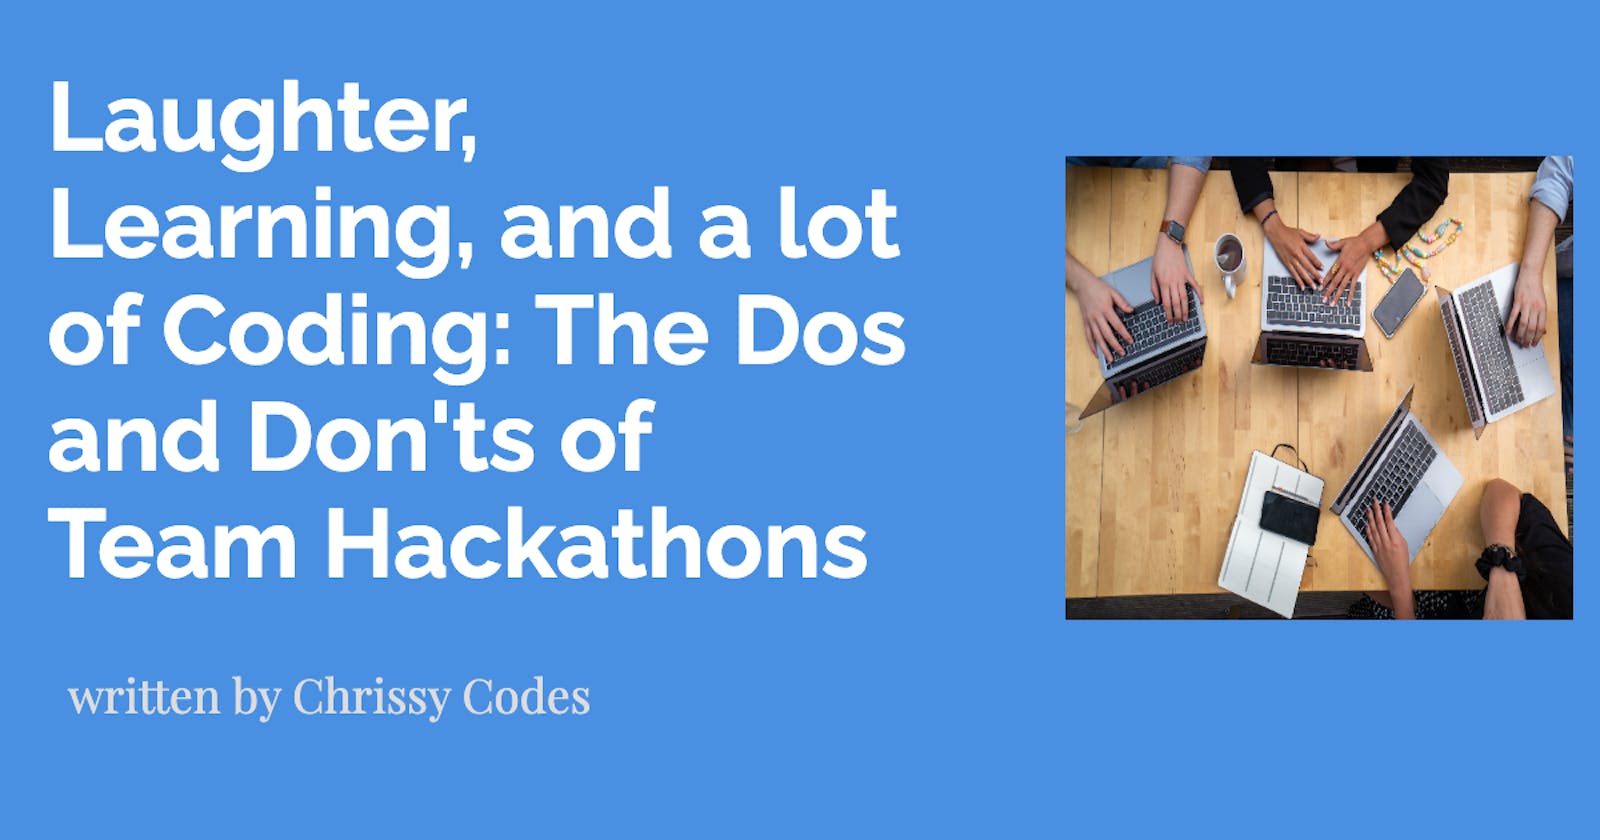 Laughter, Learning, and a lot of Coding: The Dos and Don'ts of Team Hackathons